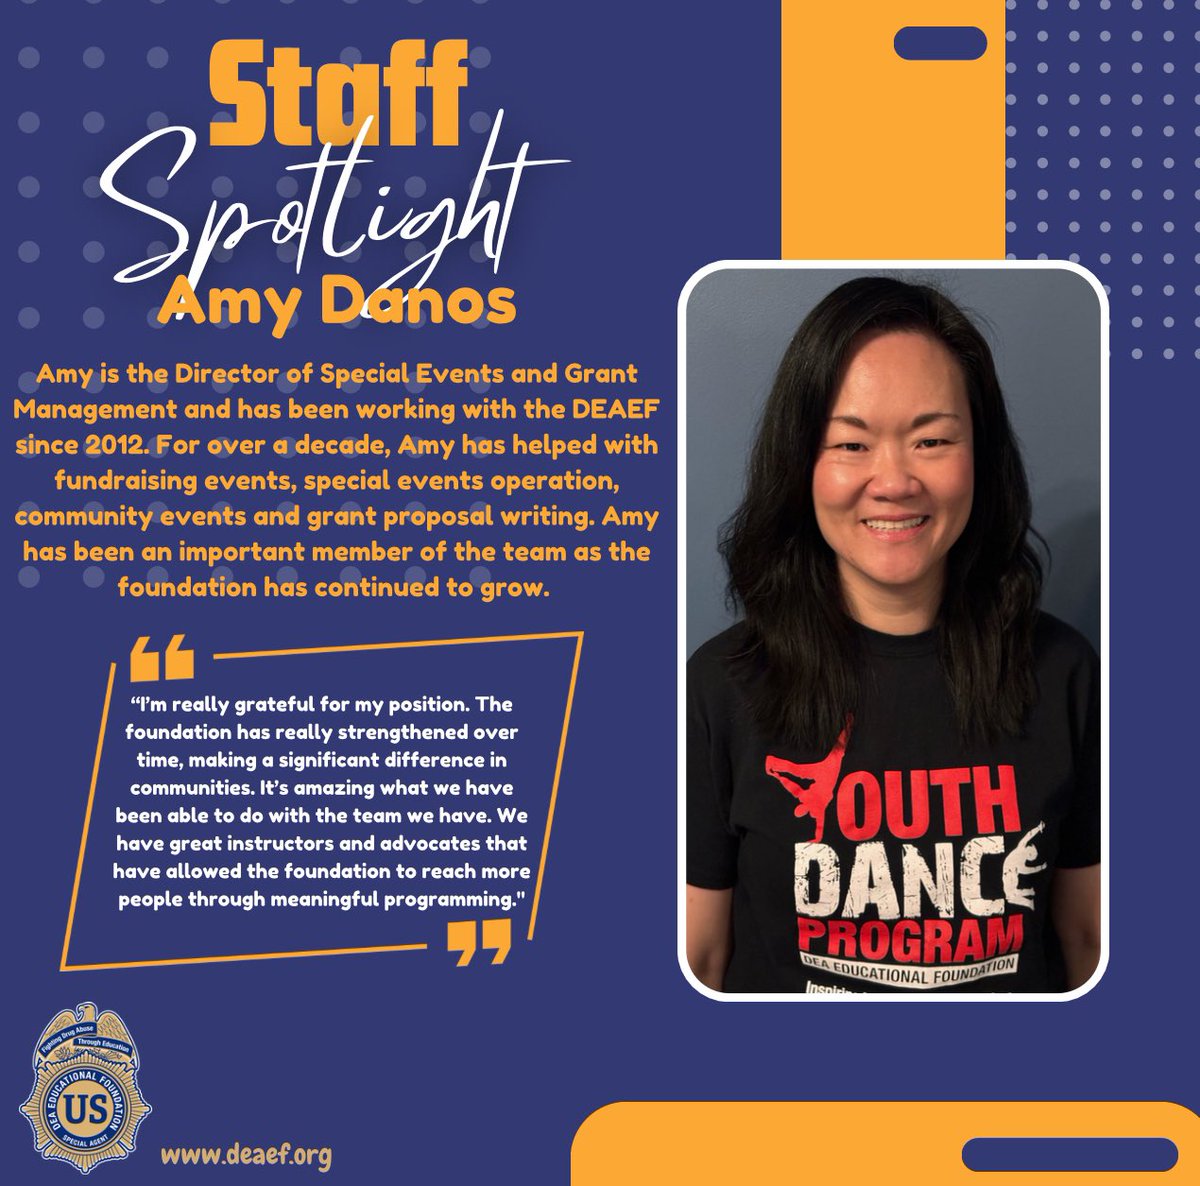 We are fortunate to have Amy on our team! Her organizational skills, attention to detail, and commitment to our youth make her a huge asset in our goal of reaching youth and communities with important drug prevention education!